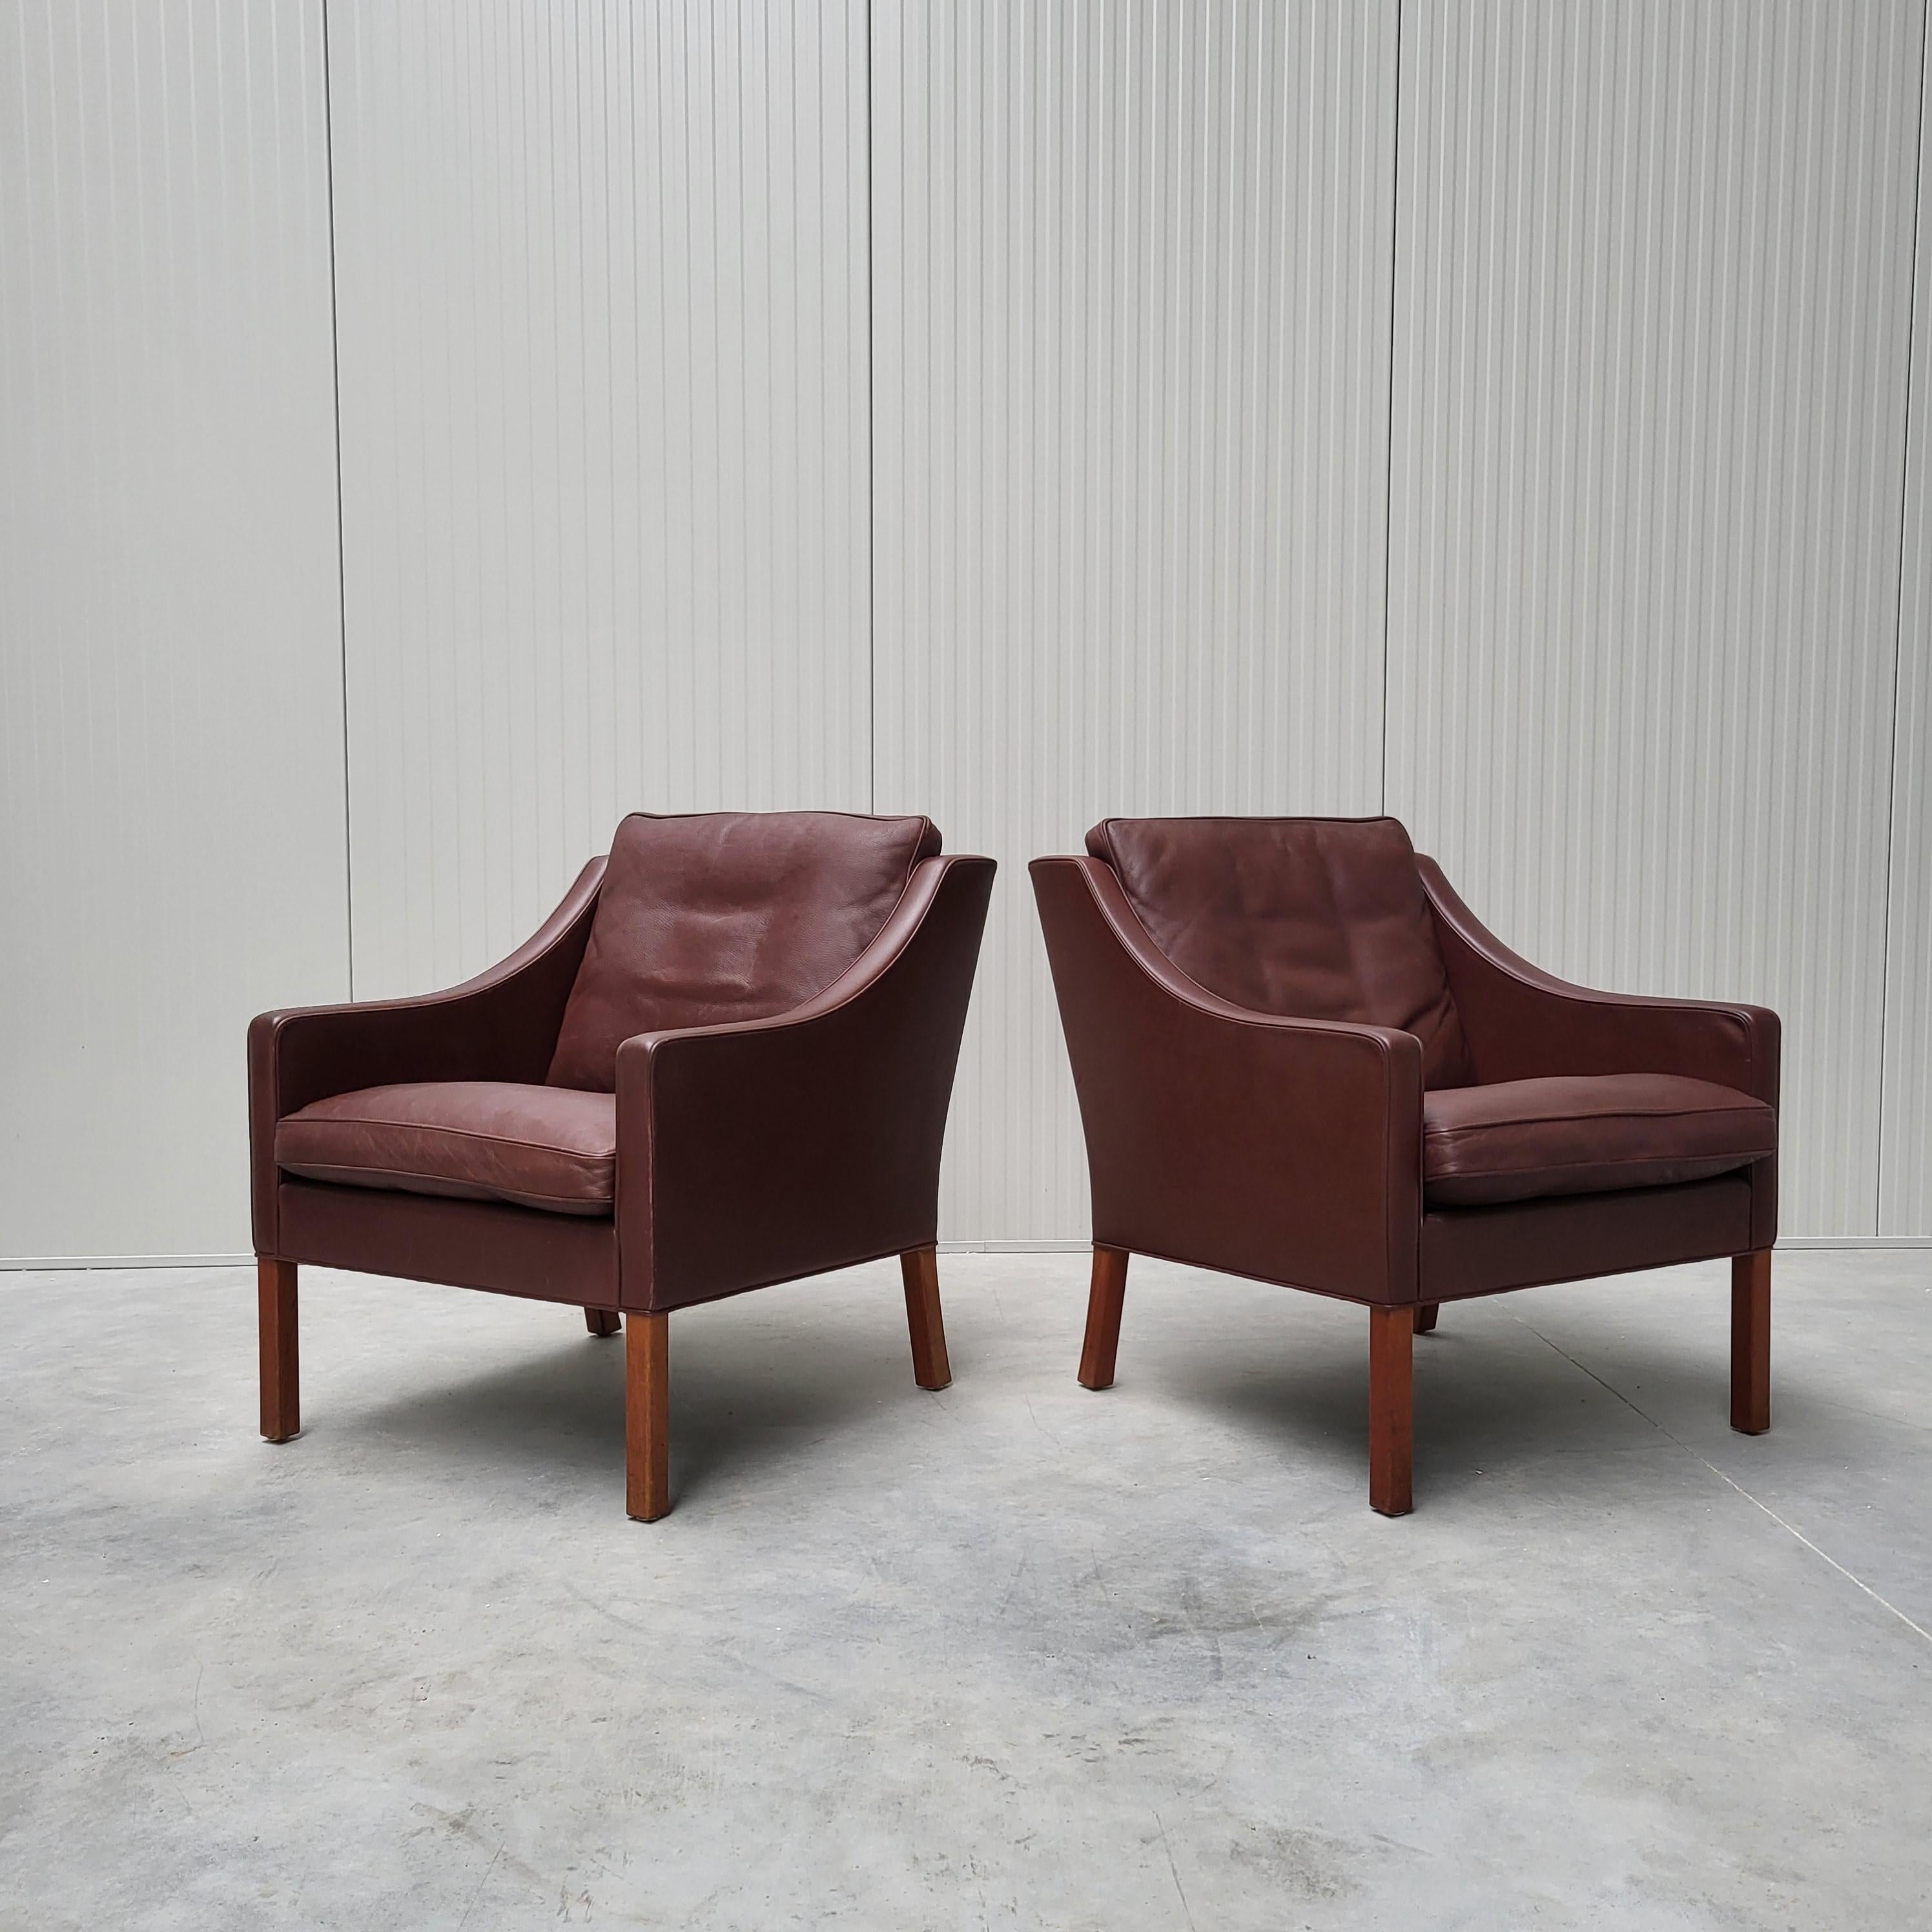 Hand-Crafted Børge Mogensen for Fredericia Living Room Mod. 2213 & 2212 Sofa & 2x Club Chair